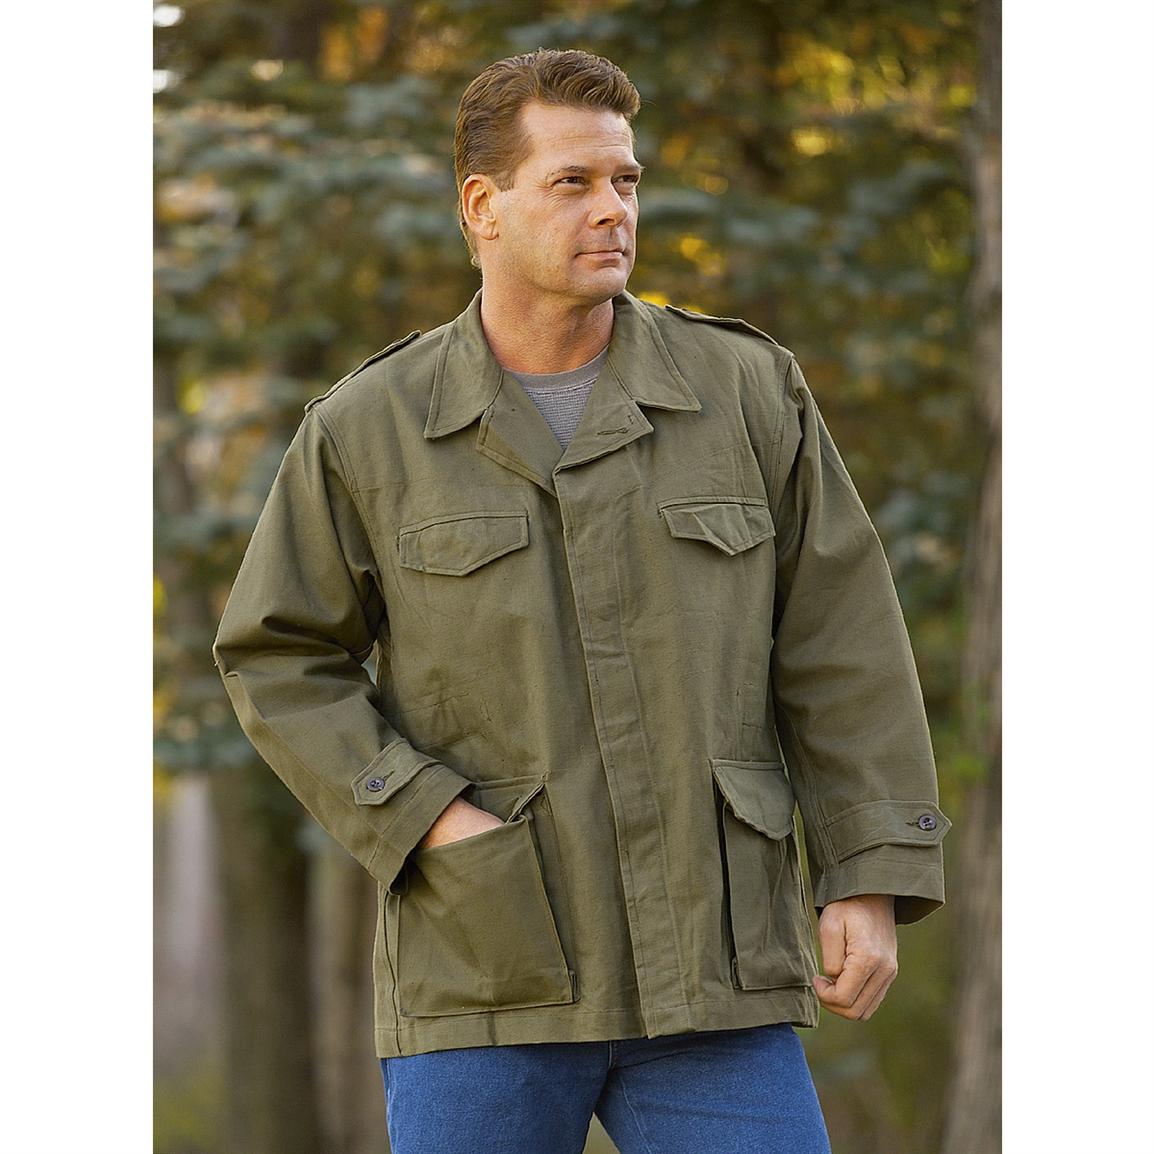 New French Mil. M47 Field Jacket, O.D. - 70640, at Sportsman's Guide